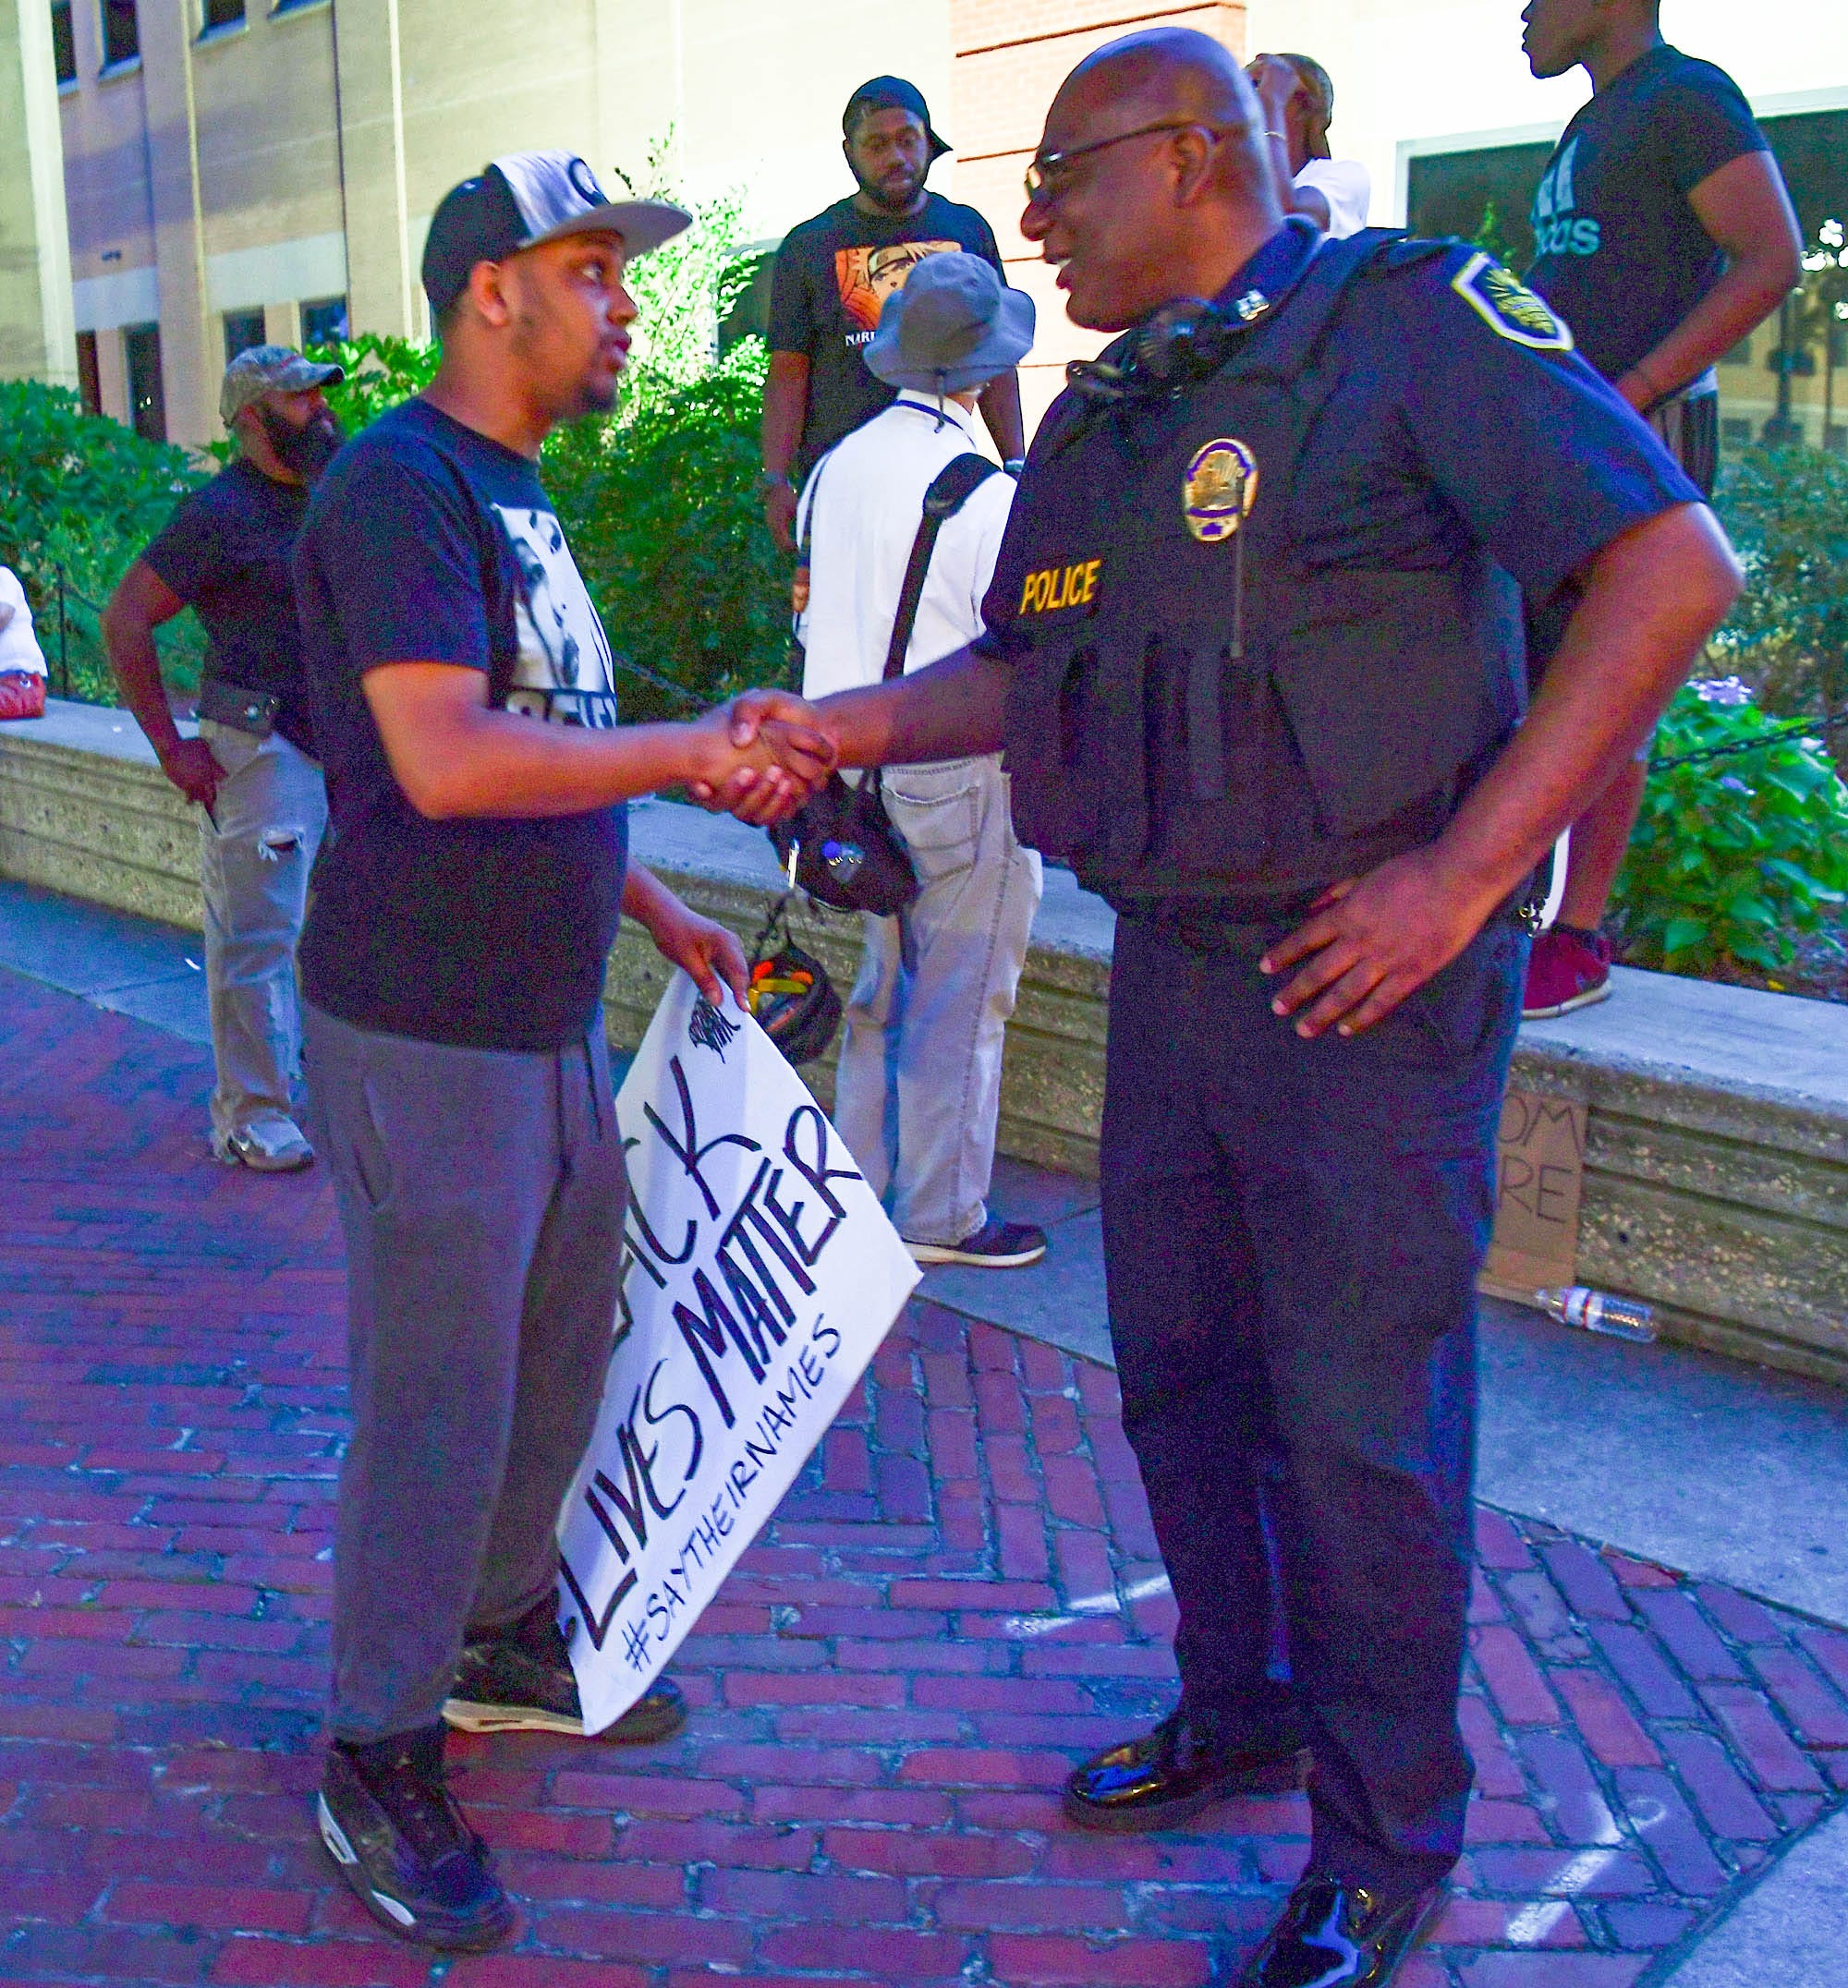 Jamel Hunter of Anderson shakes hands with Capt. Mike Aikens during a protest remembering George Floyd in downtown Anderson, S.C., on June 3, 2020.